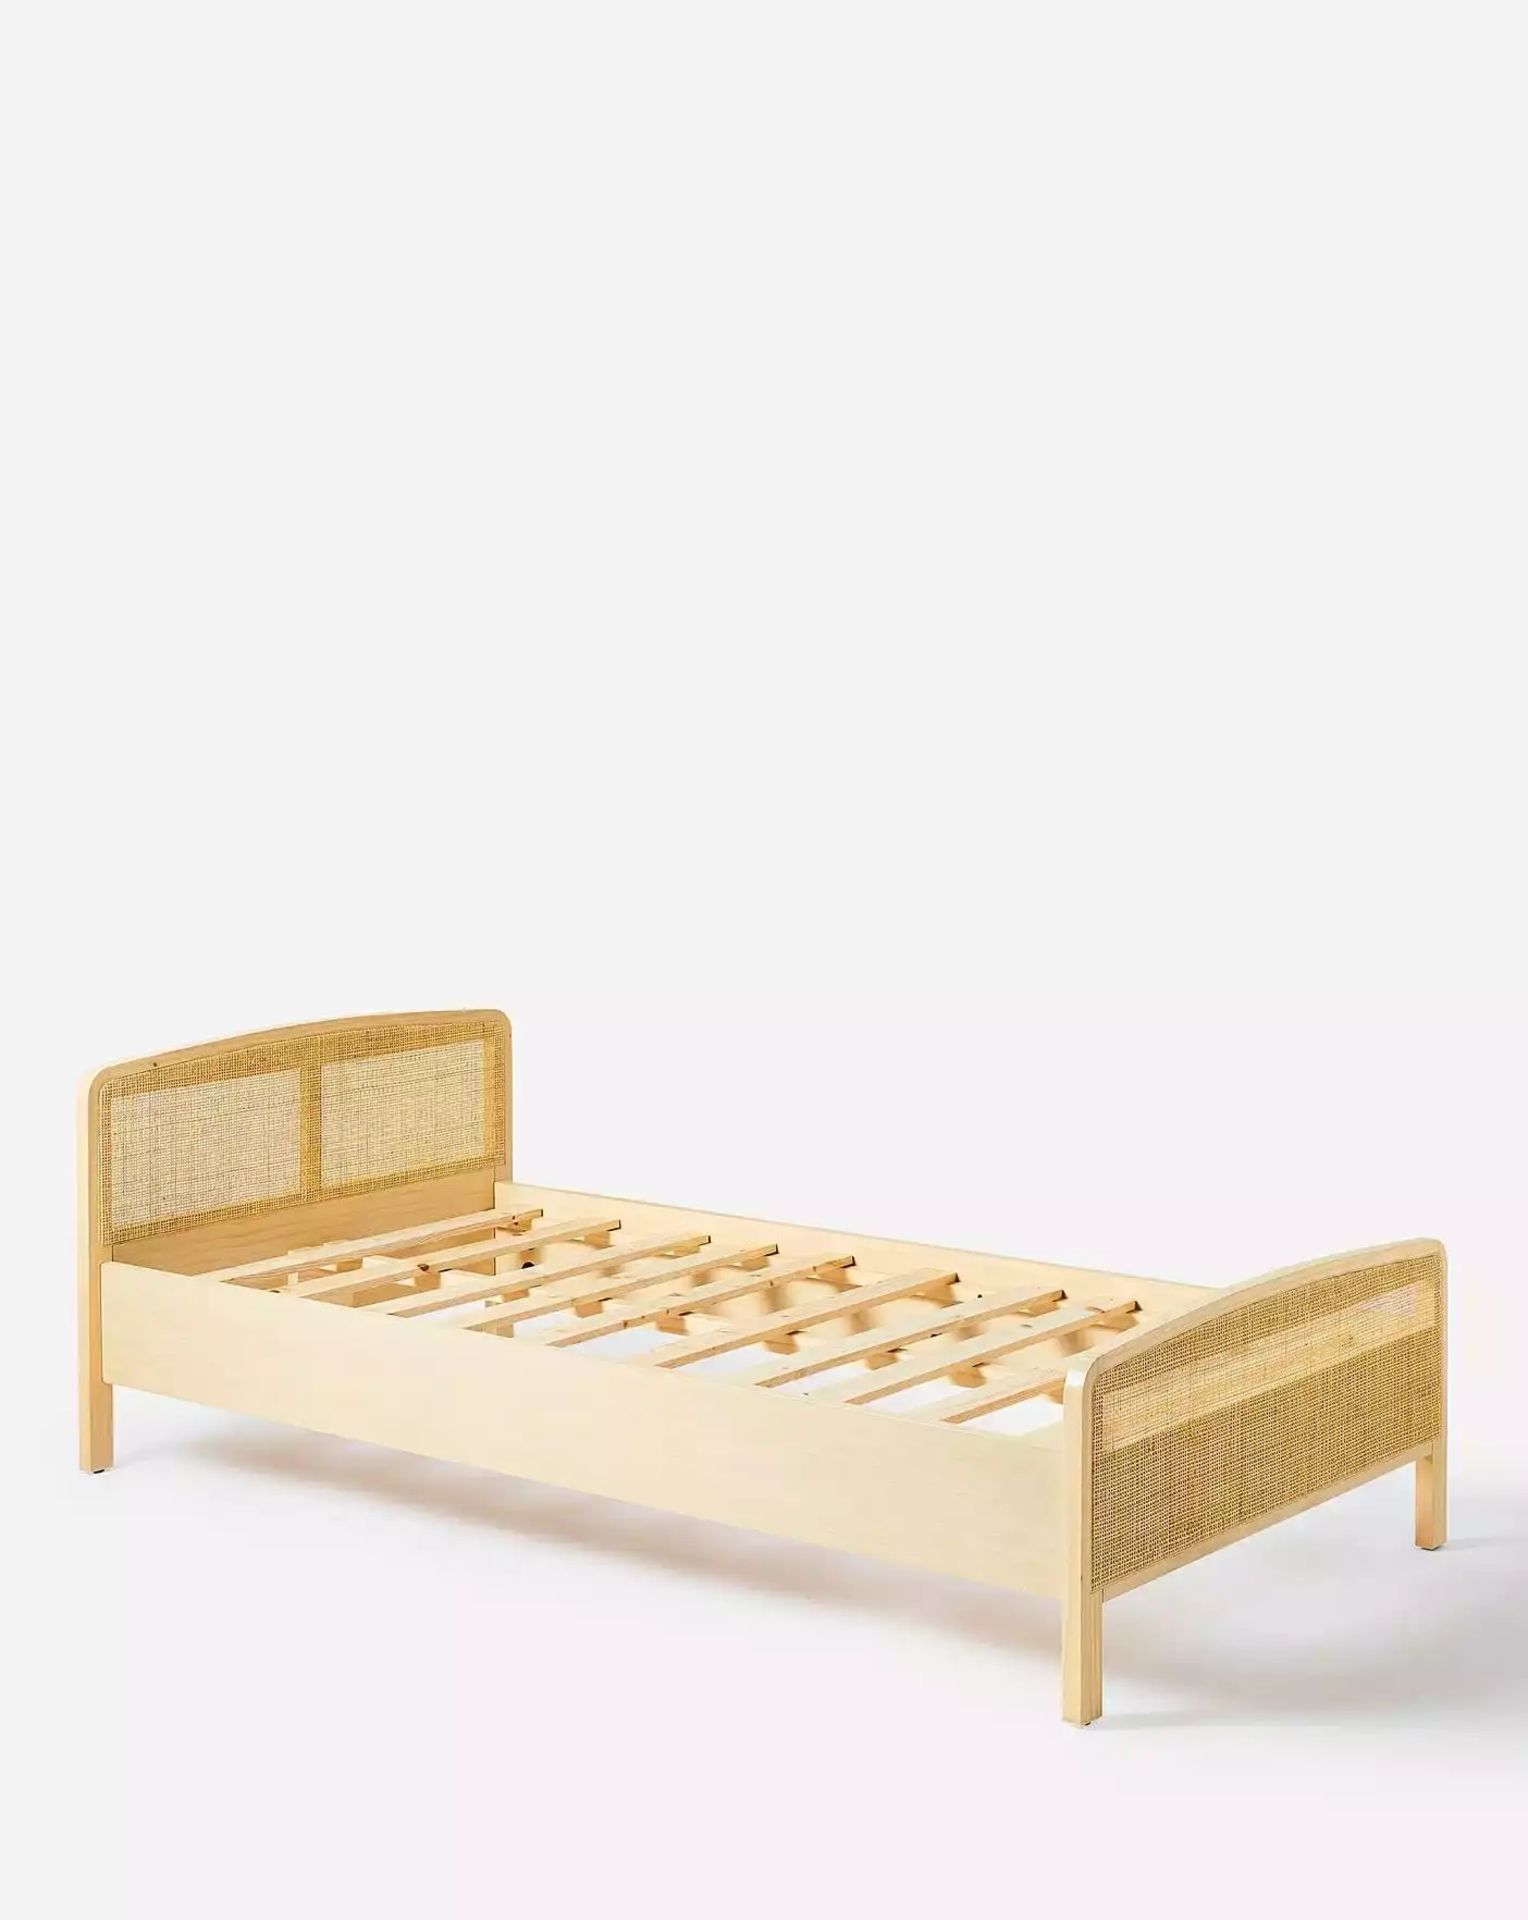 TRADE PALLET TO CONTAIN 4x BRAND NEW Noah Rattan Kids Bedframe. RRP £449 EACH. Beautifully made, our - Image 3 of 3